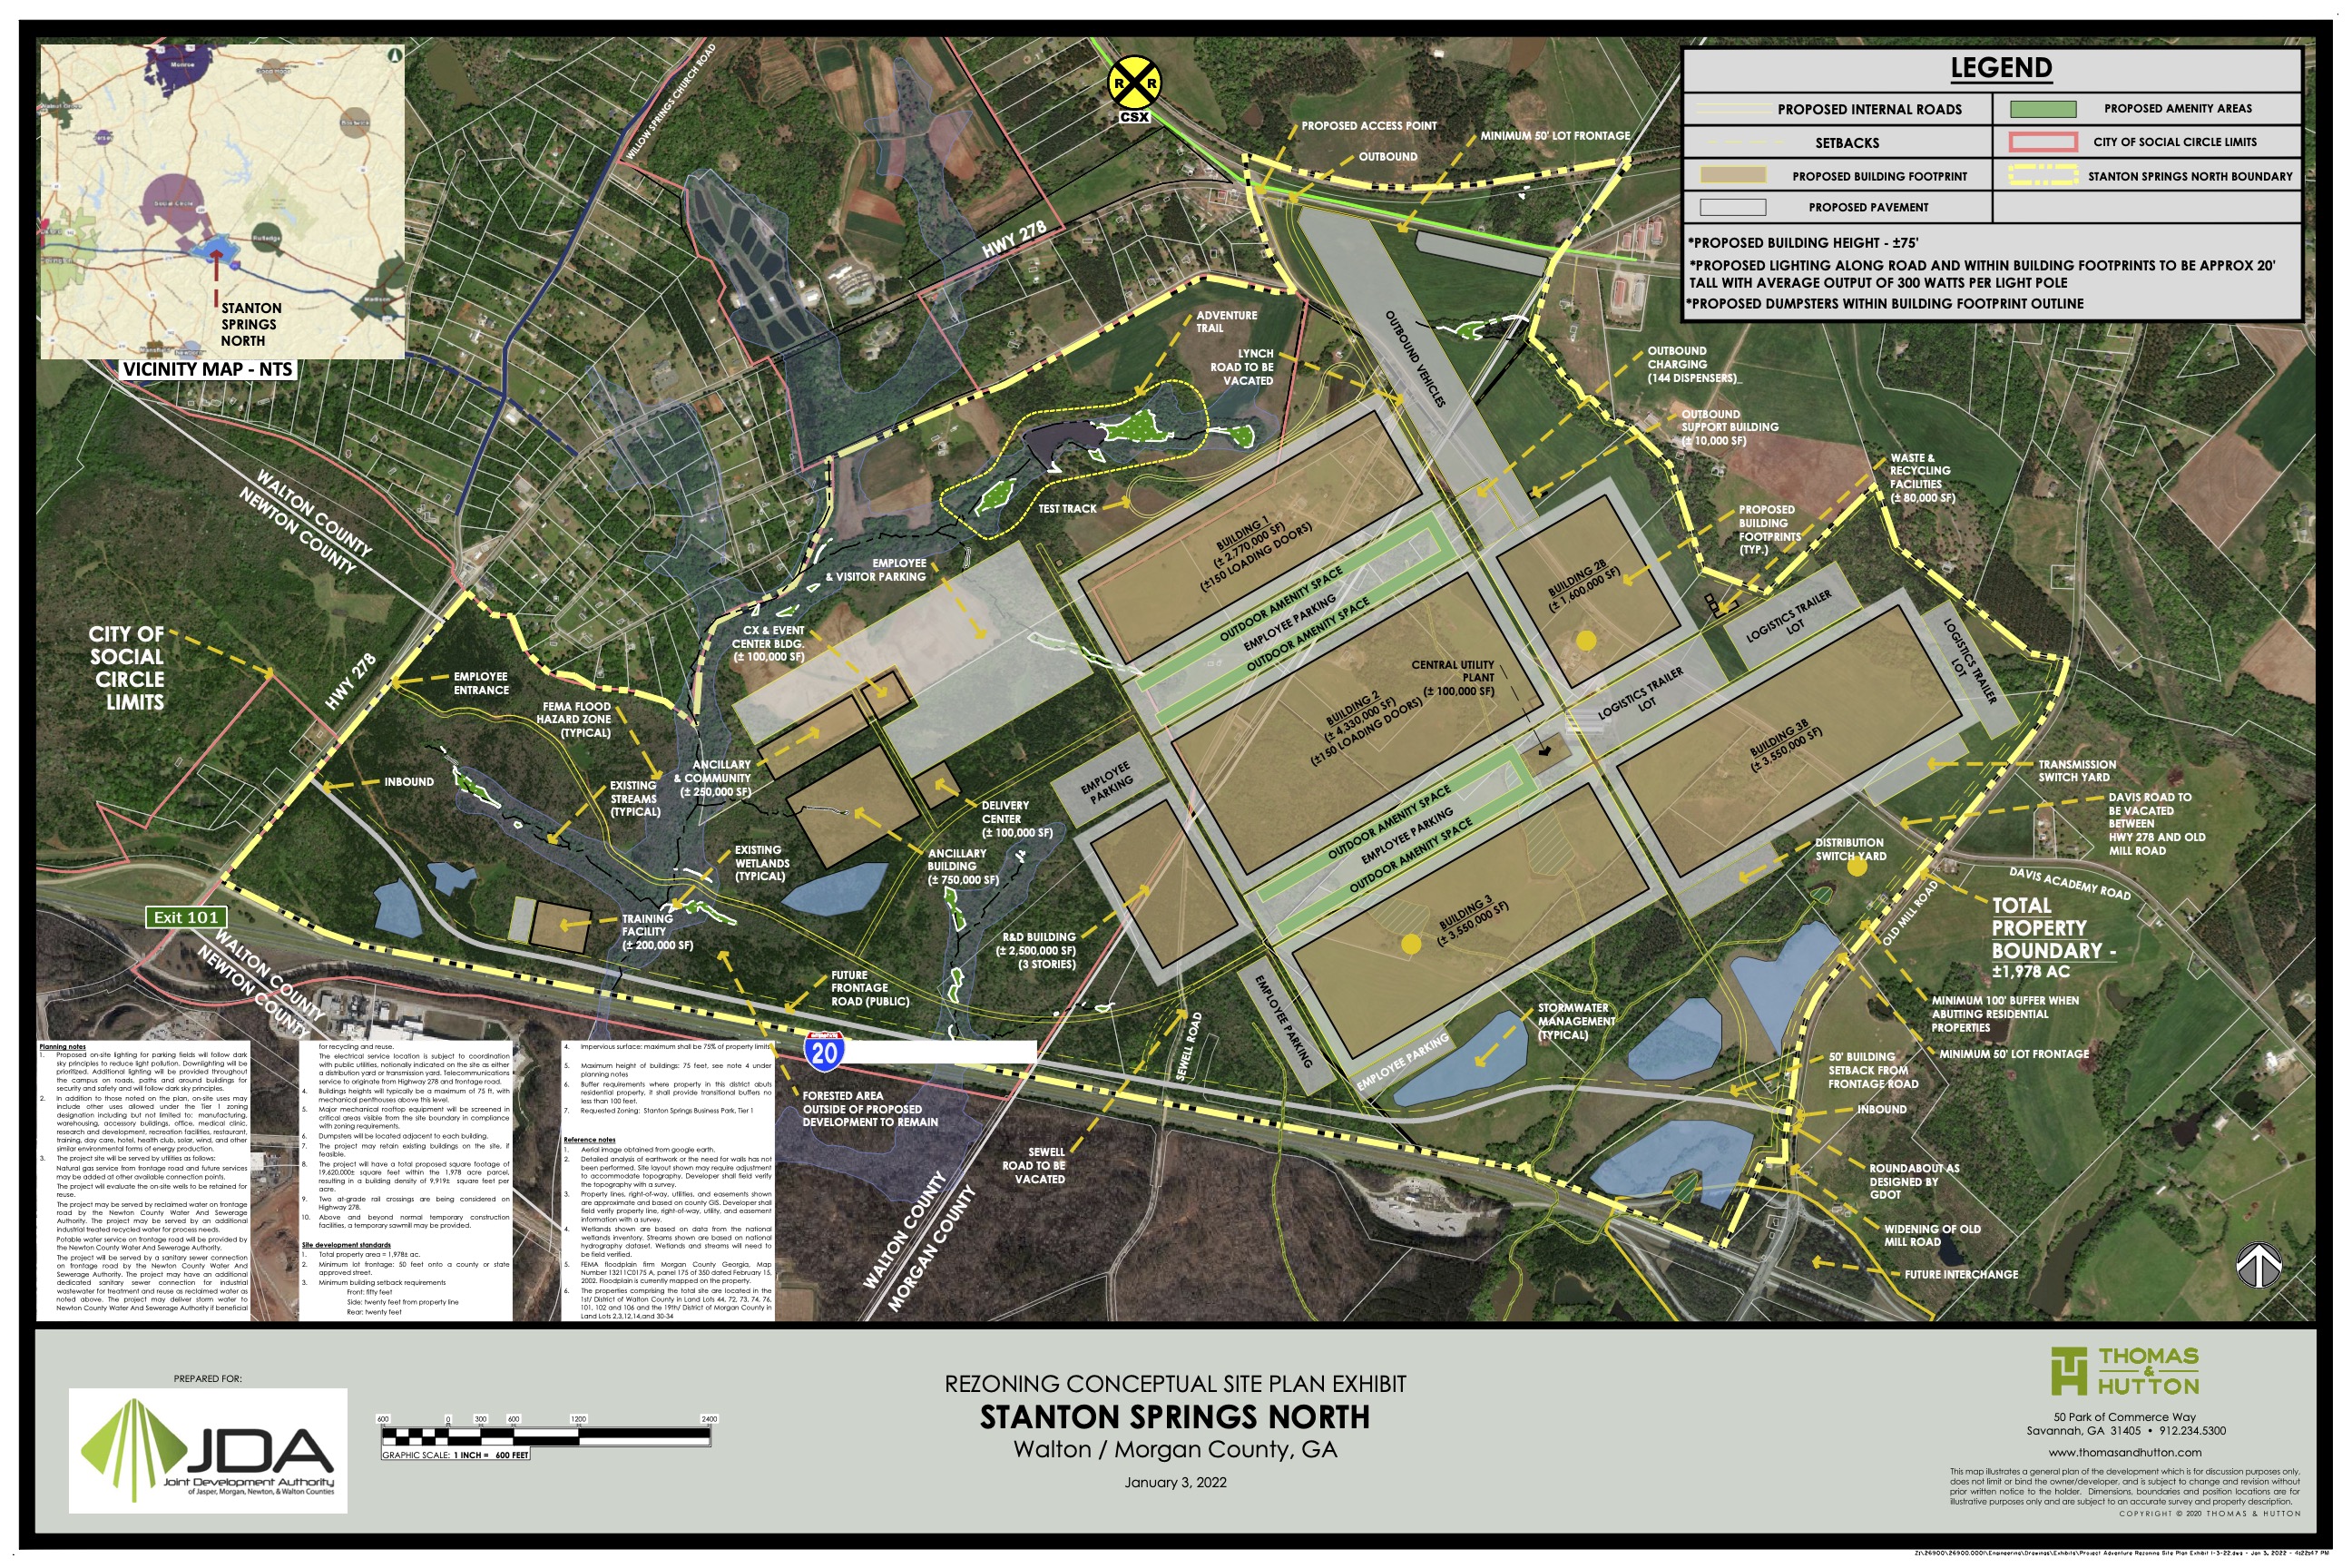 Rivian's site plans reveal nearly 20 million sq. ft. of